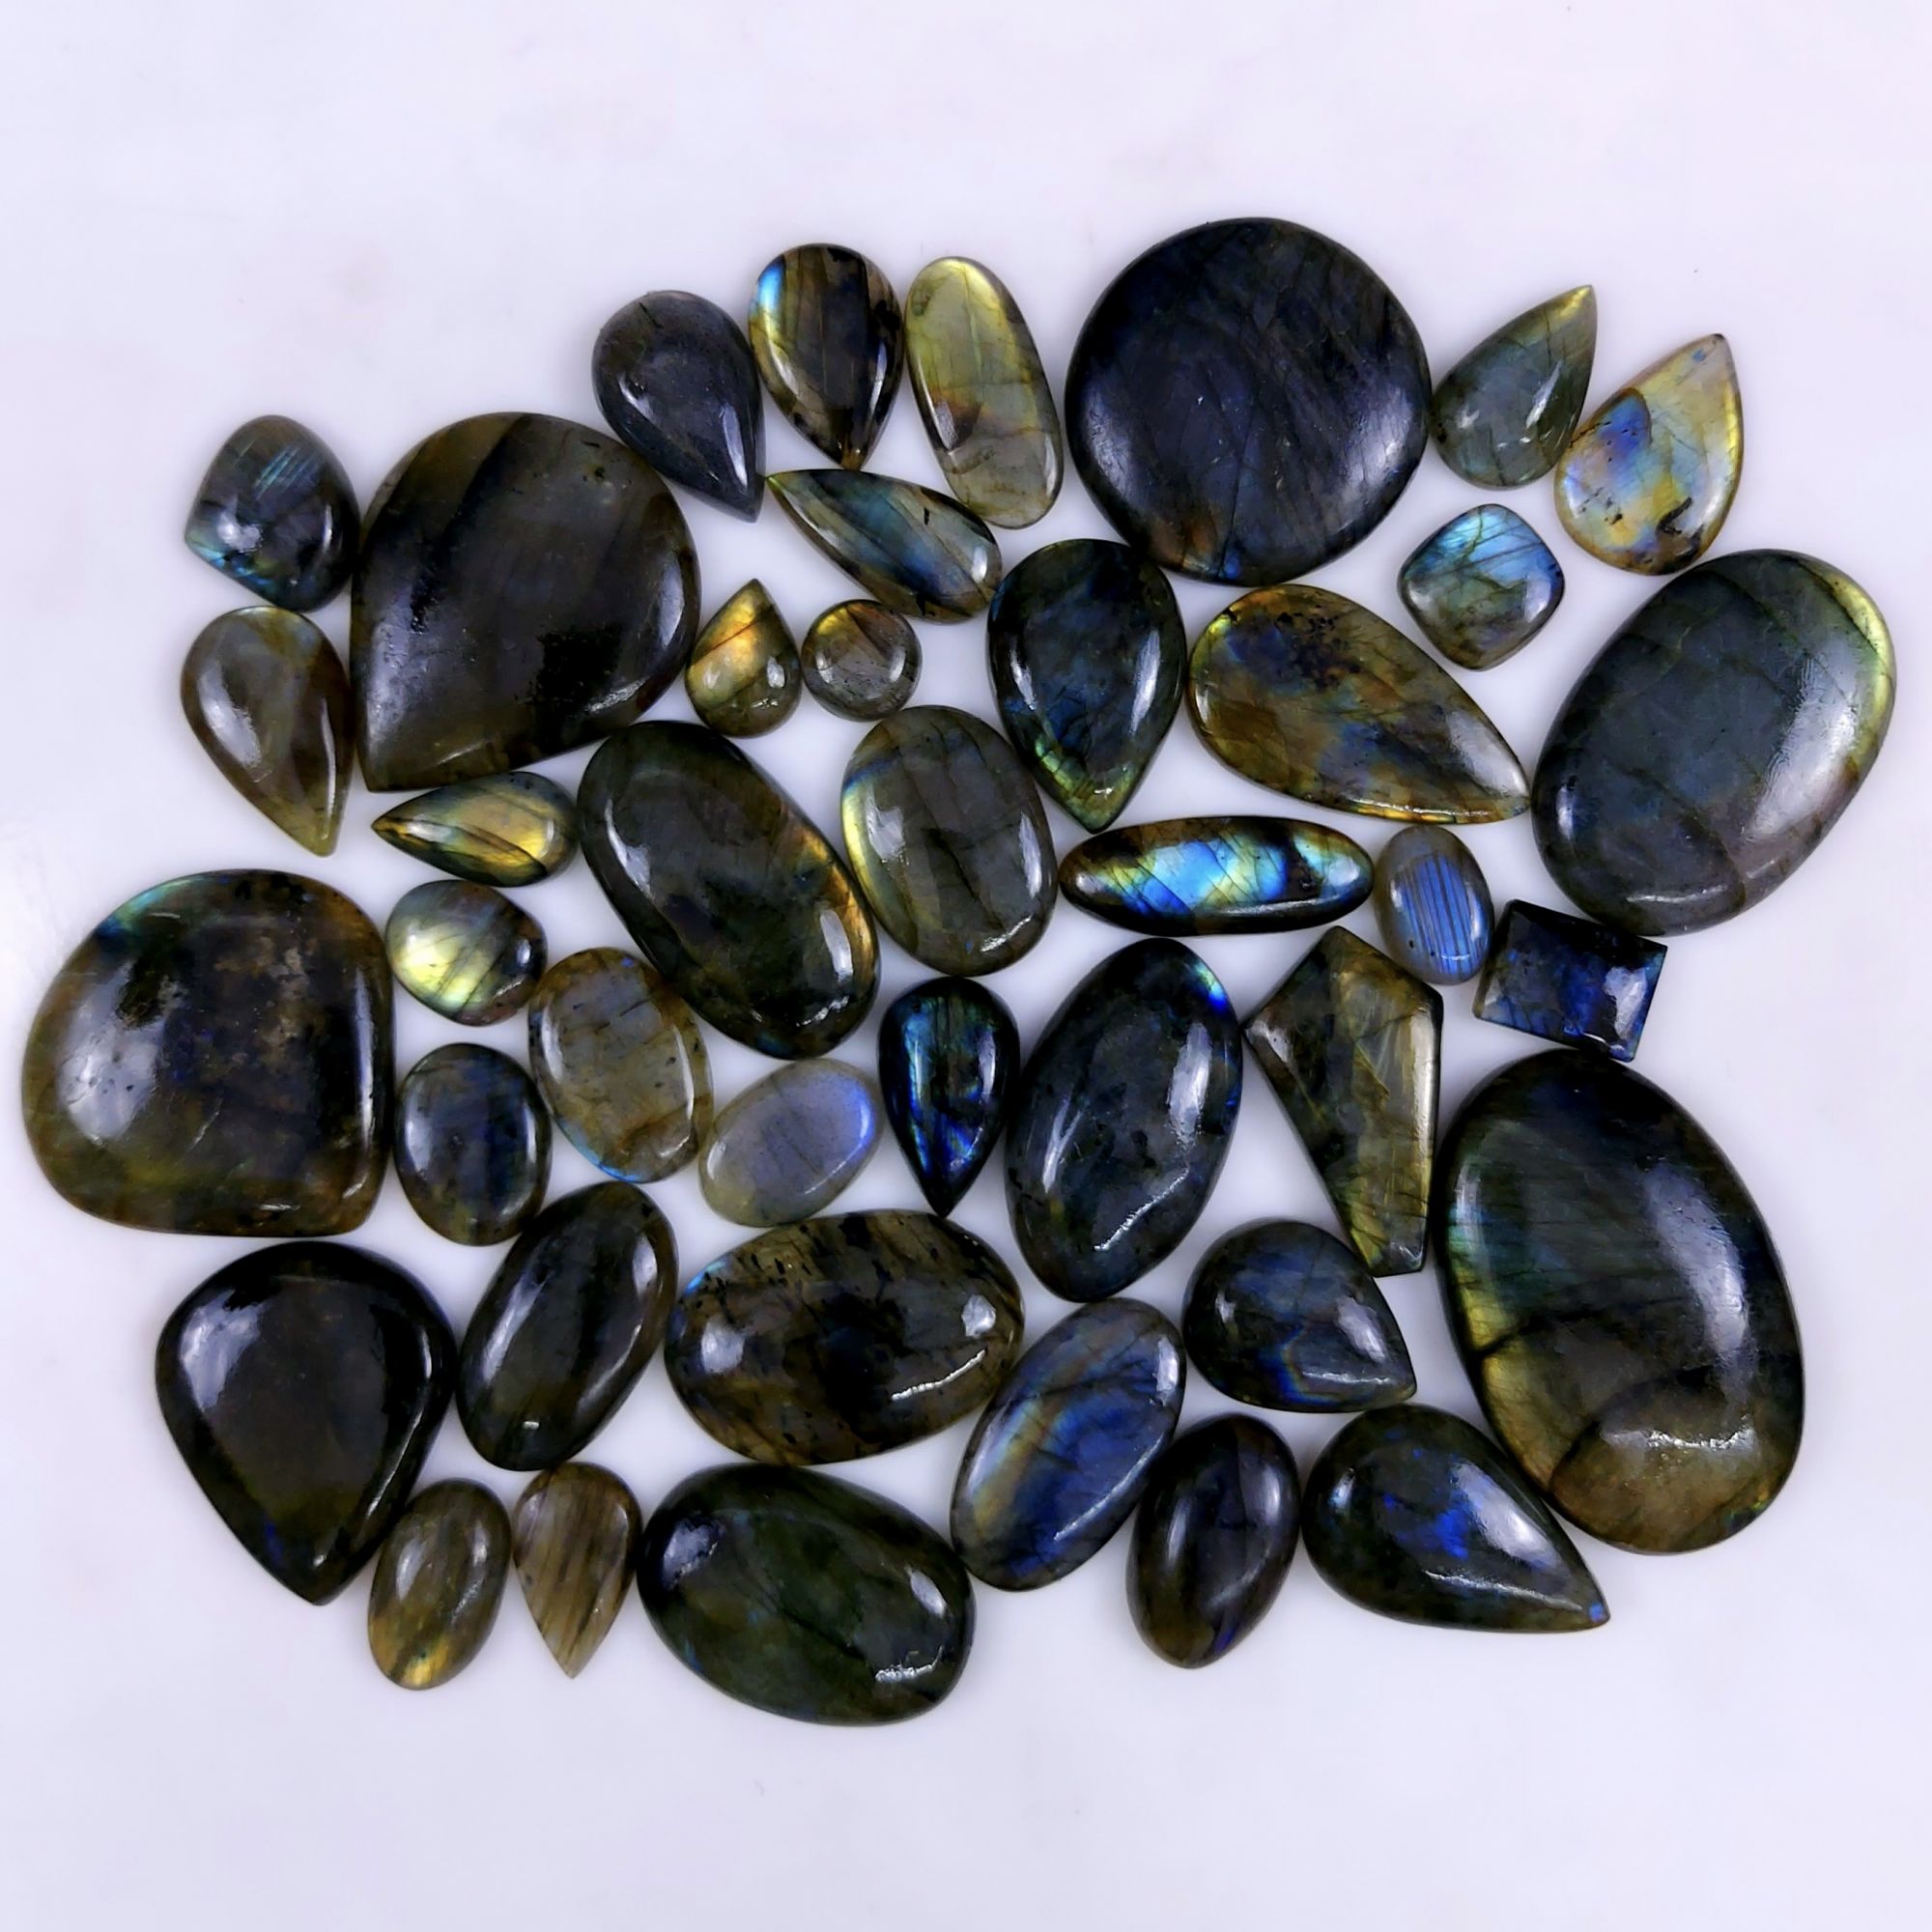 37pc 1551Cts Labradorite Cabochon Multifire Healing Crystal For Jewelry Supplies, Labradorite Necklace Handmade Wire Wrapped Gemstone Pendant 45x43 16x12mm#6320